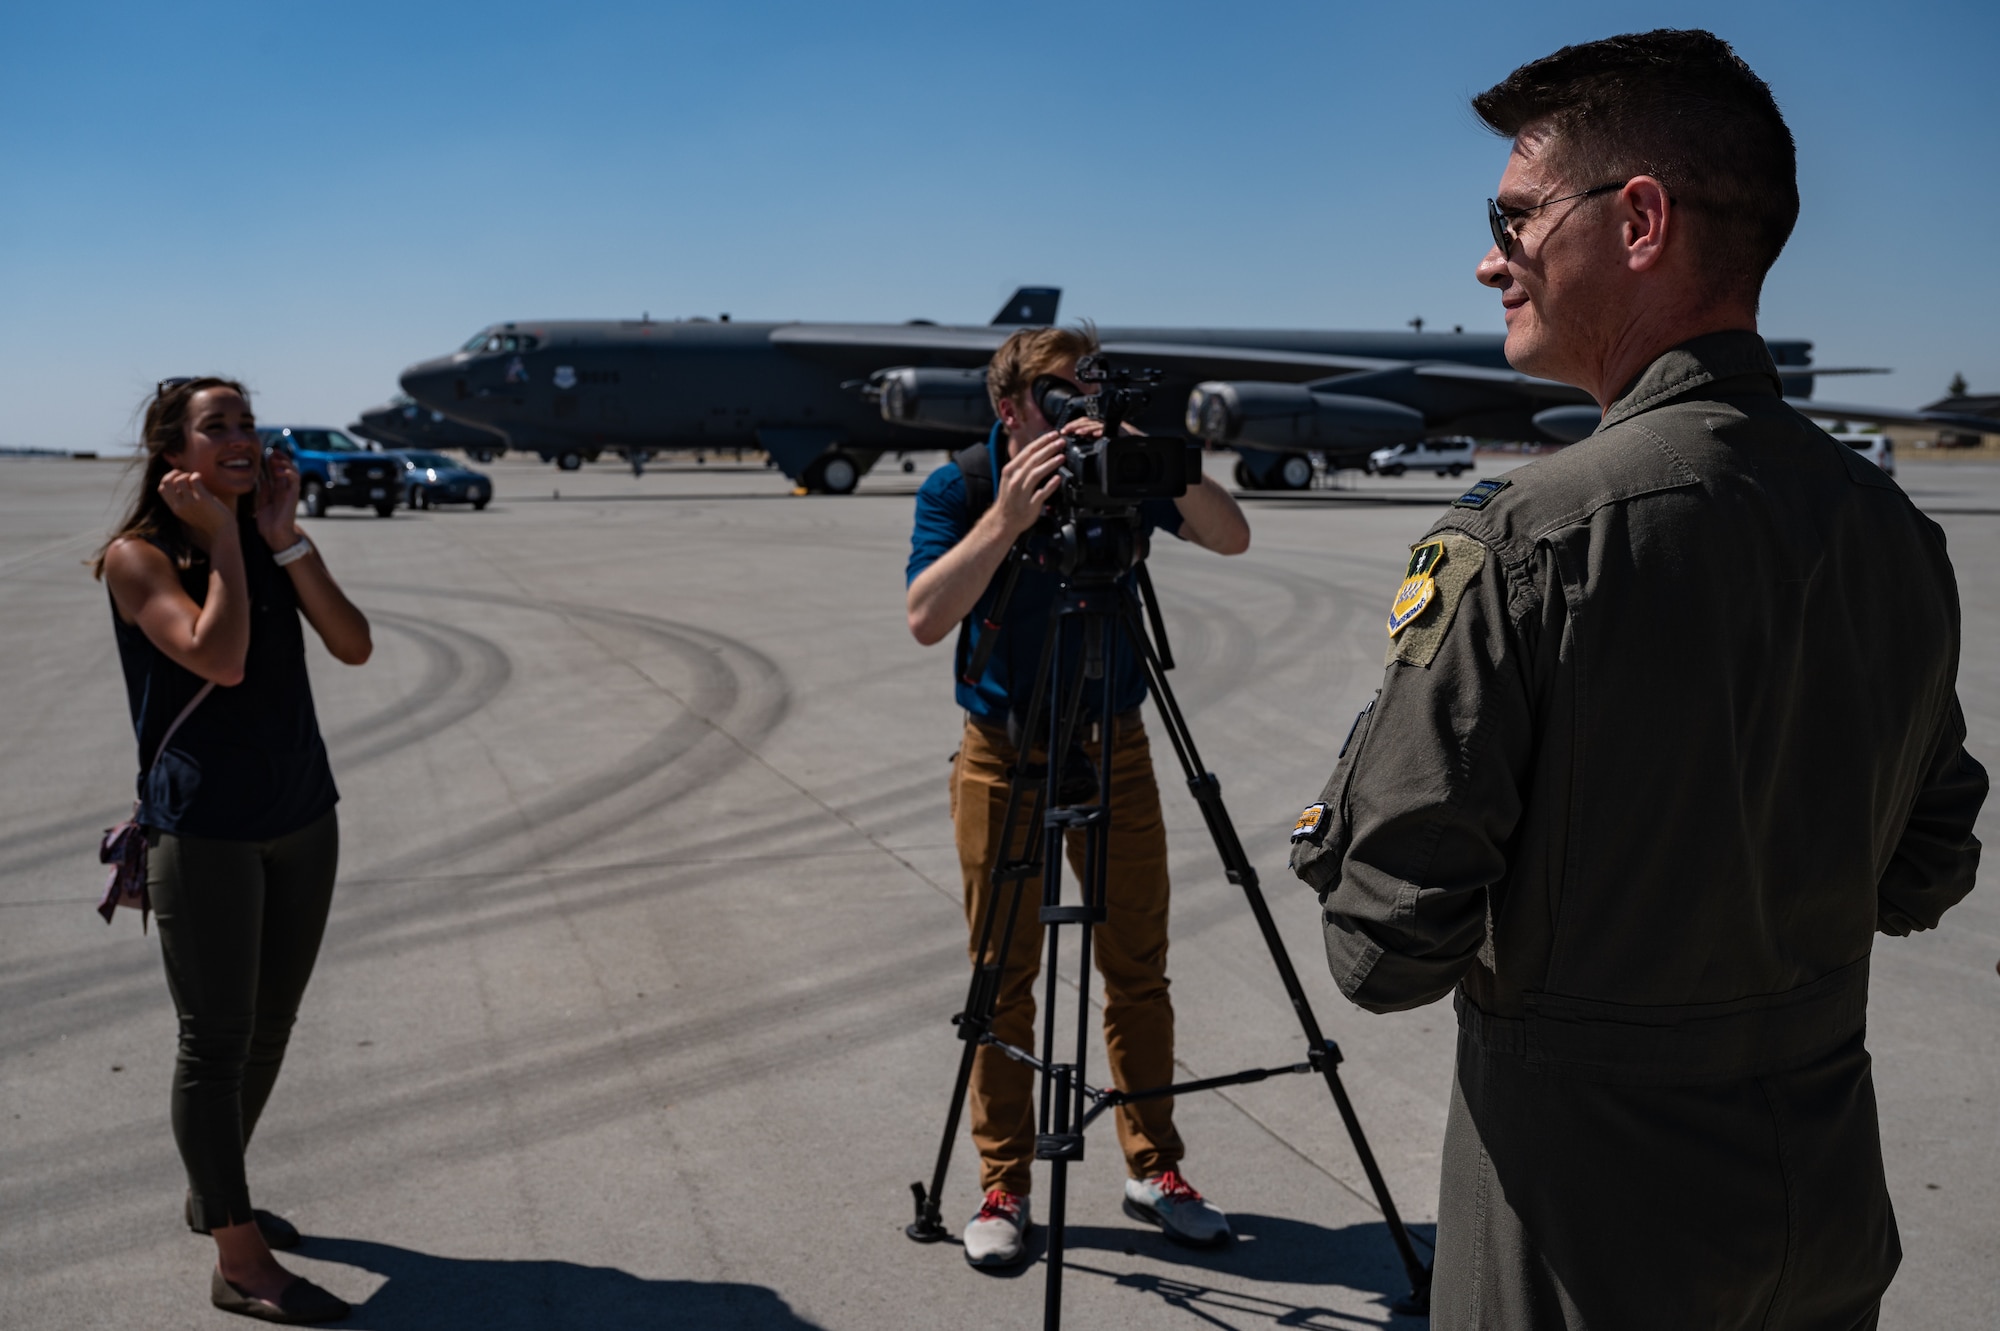 Capt. Tanner Devotie, 96th Bomb Squadron aircraft commander, speaks with local news media during an interview at Fairchild Air Force Base, Washington, Aug. 17, 2022. Four separate media outlets covered the first return of the B-52H Stratofortress to Fairchild in 12 years. (U.S. Air Force photo by Senior Airman Chase Sullivan)